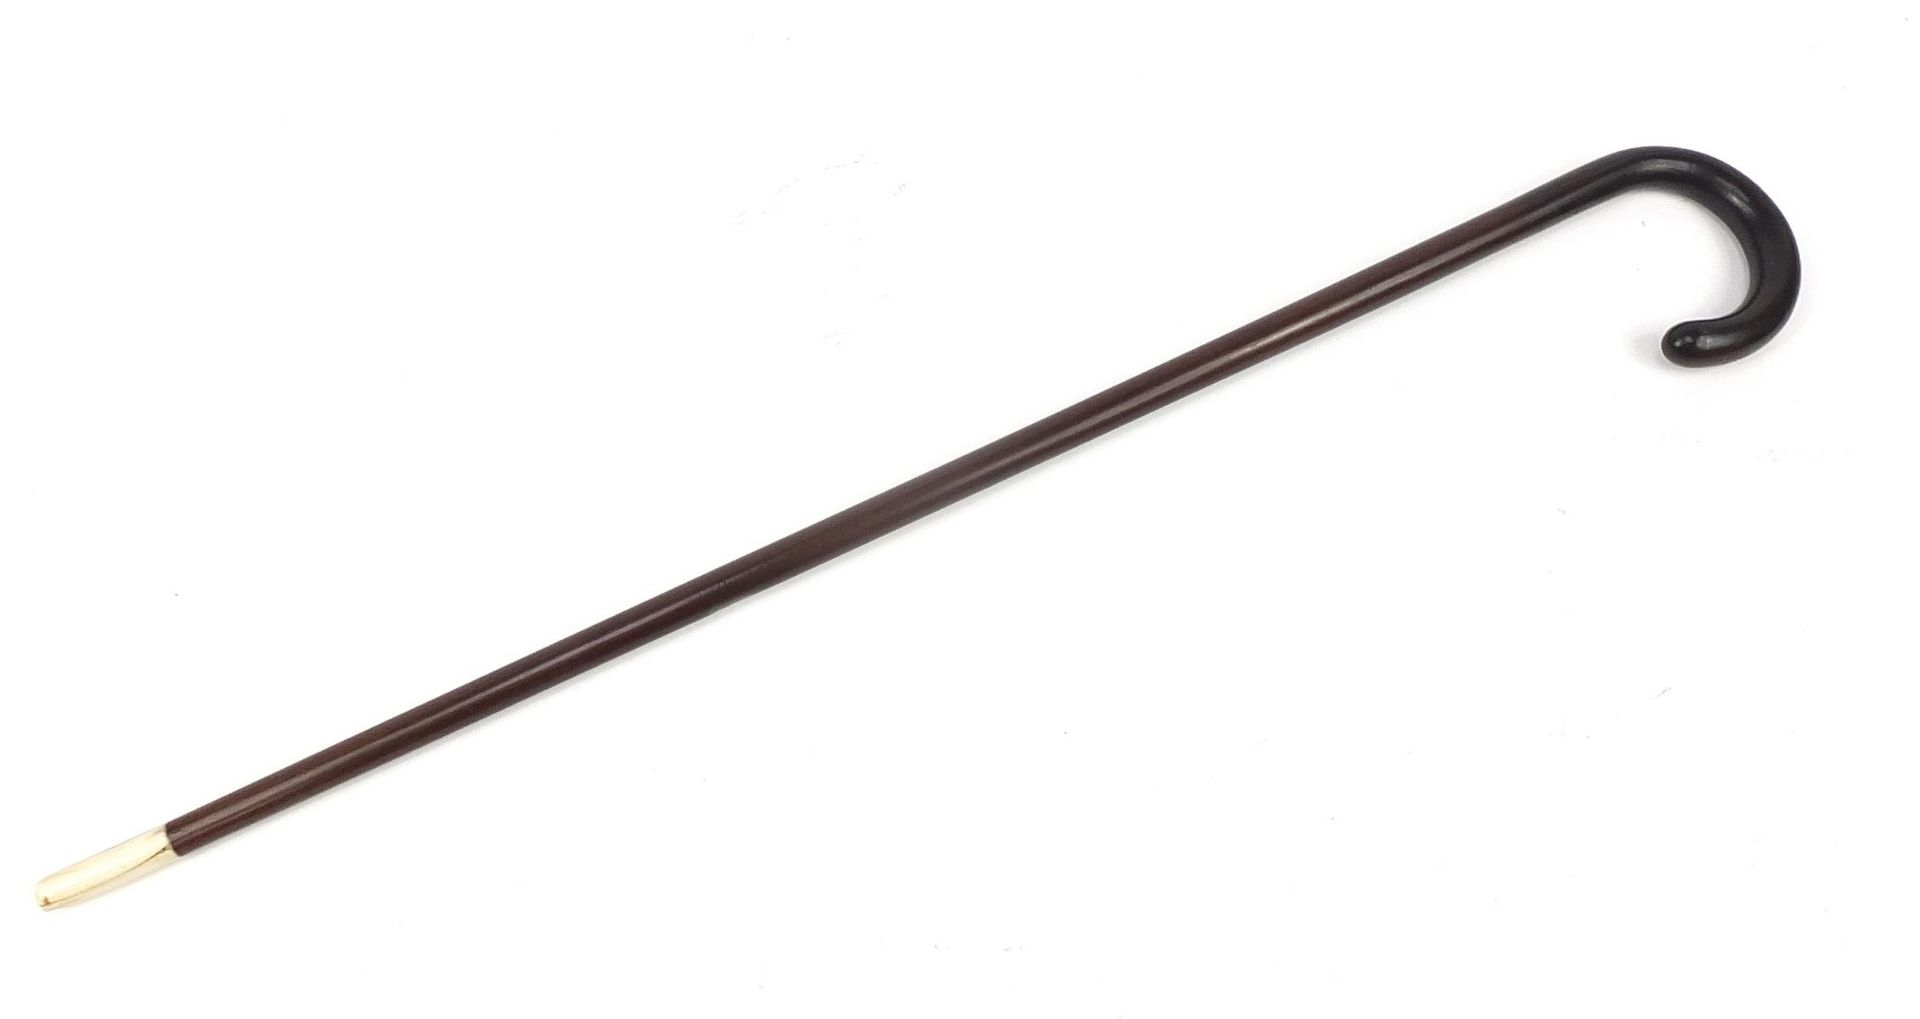 Snakewood walking cane with an ivory ferule, 82cm in length - Image 3 of 6